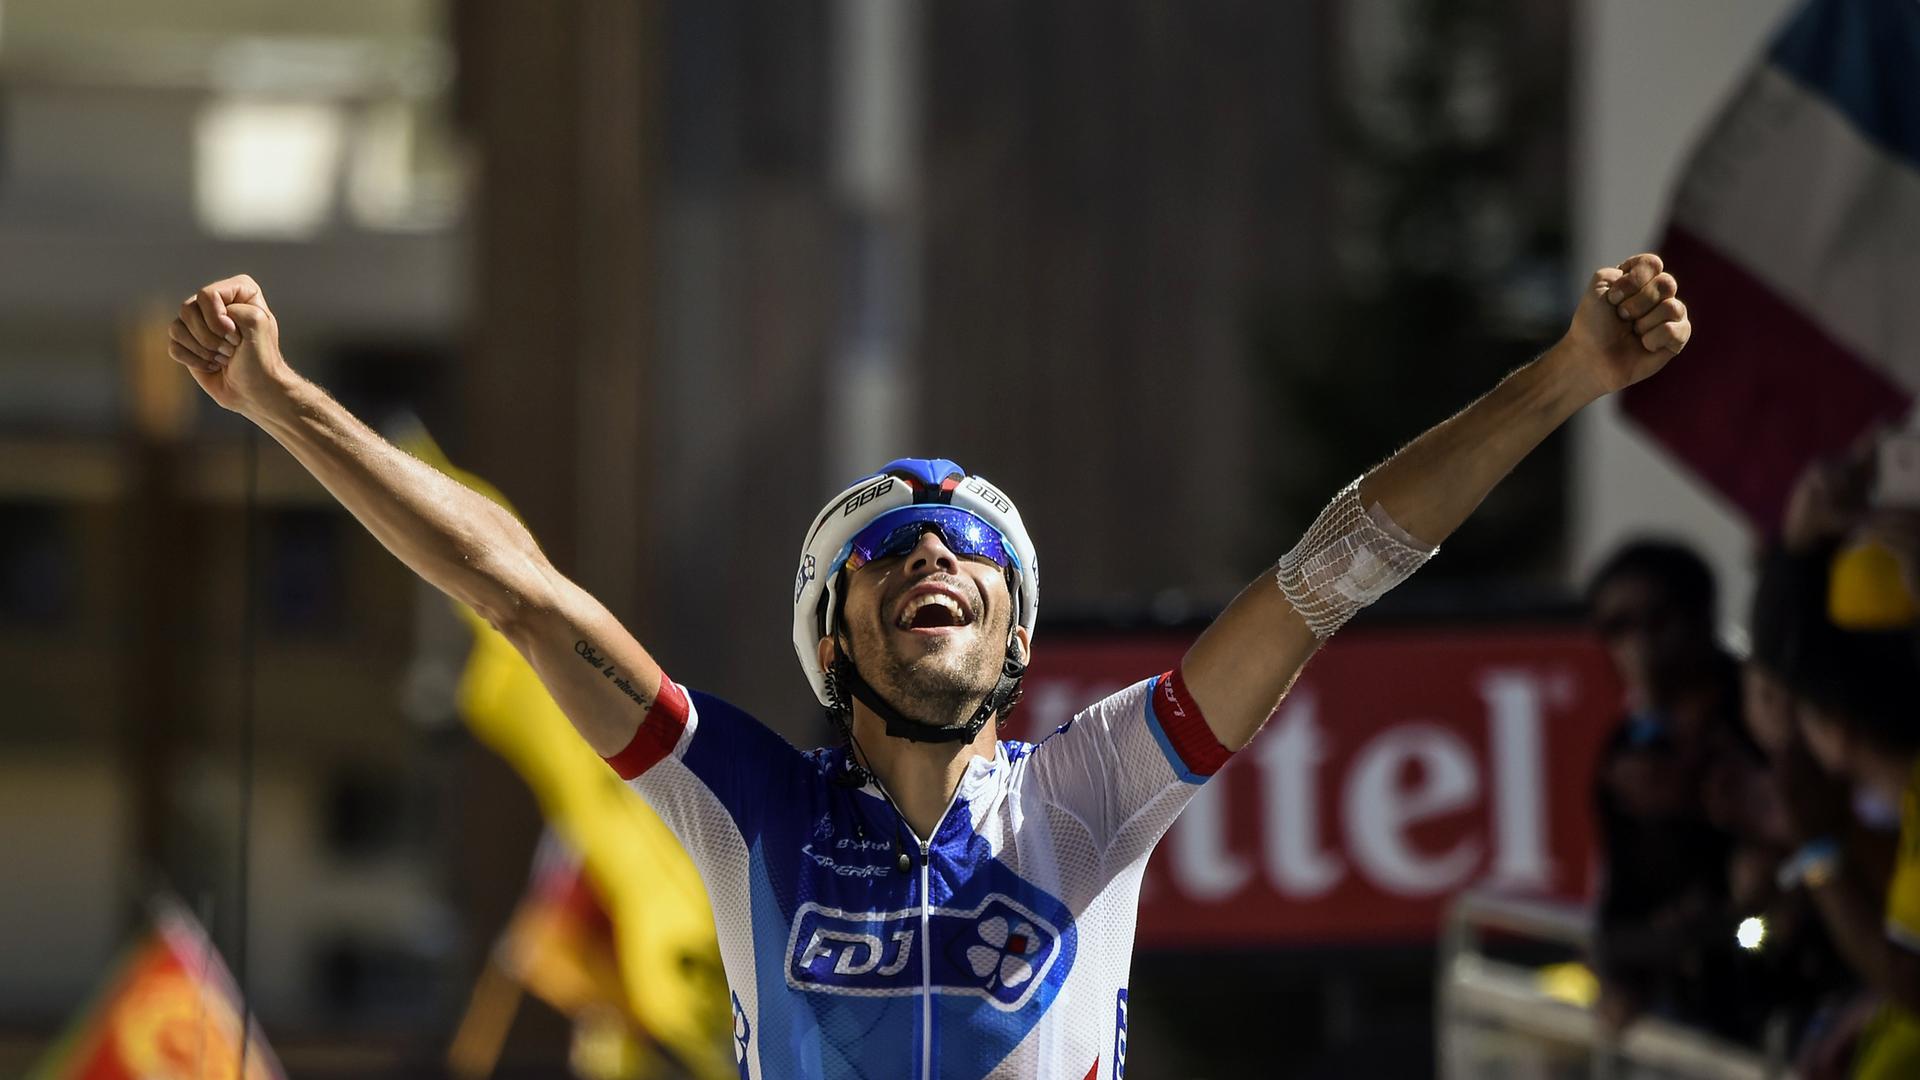 France's Thibaut Pinot celebrates as he crosses the finish line at the end of the 110,5 km twentieth stage of the 102nd edition of the Tour de France cycling race on July 25, 2015, between Modane Valfrejus and Alpe d'Huez, French Alps.  AFP PHOTO / ERIC FEFERBERG